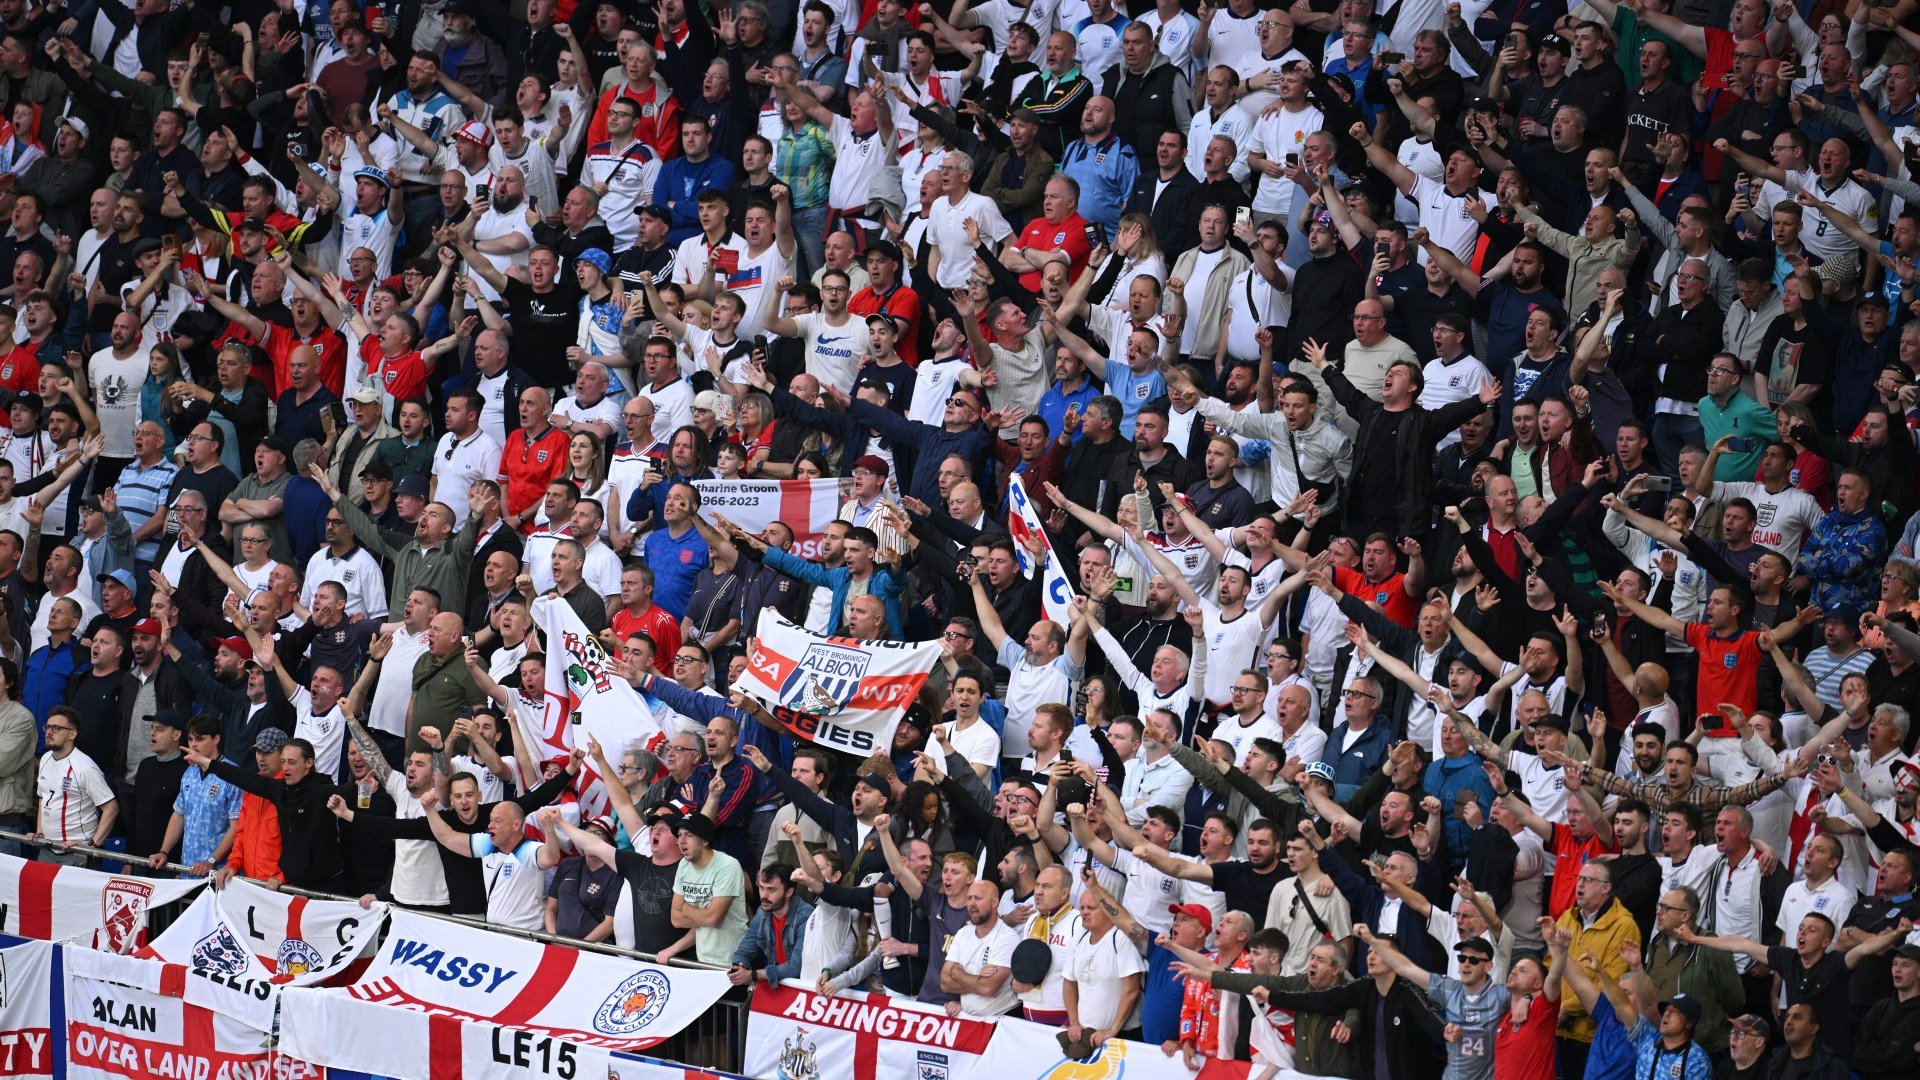 England handed UEFA punishment in response to fans booing Slovenia national anthem